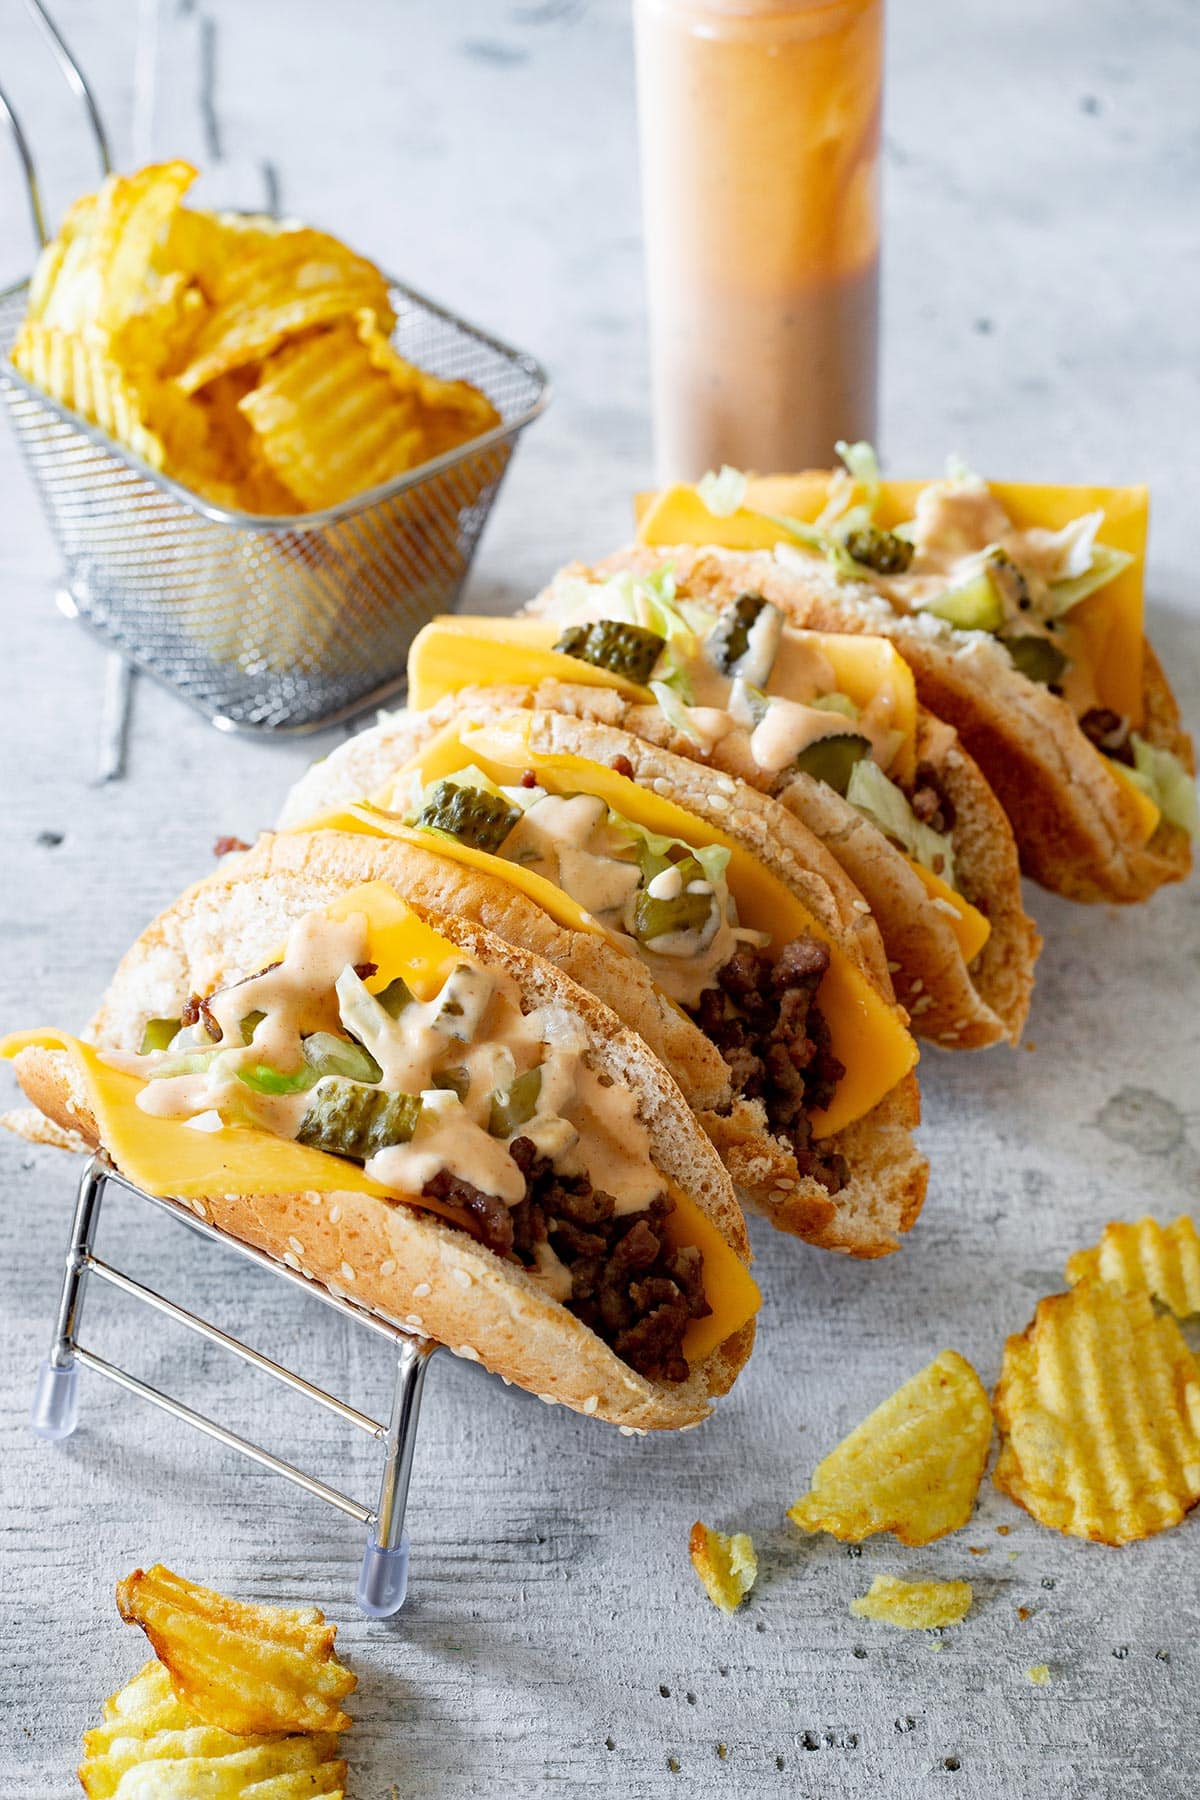 Big Mac Tacos in a taco holder with potato chips on the side.